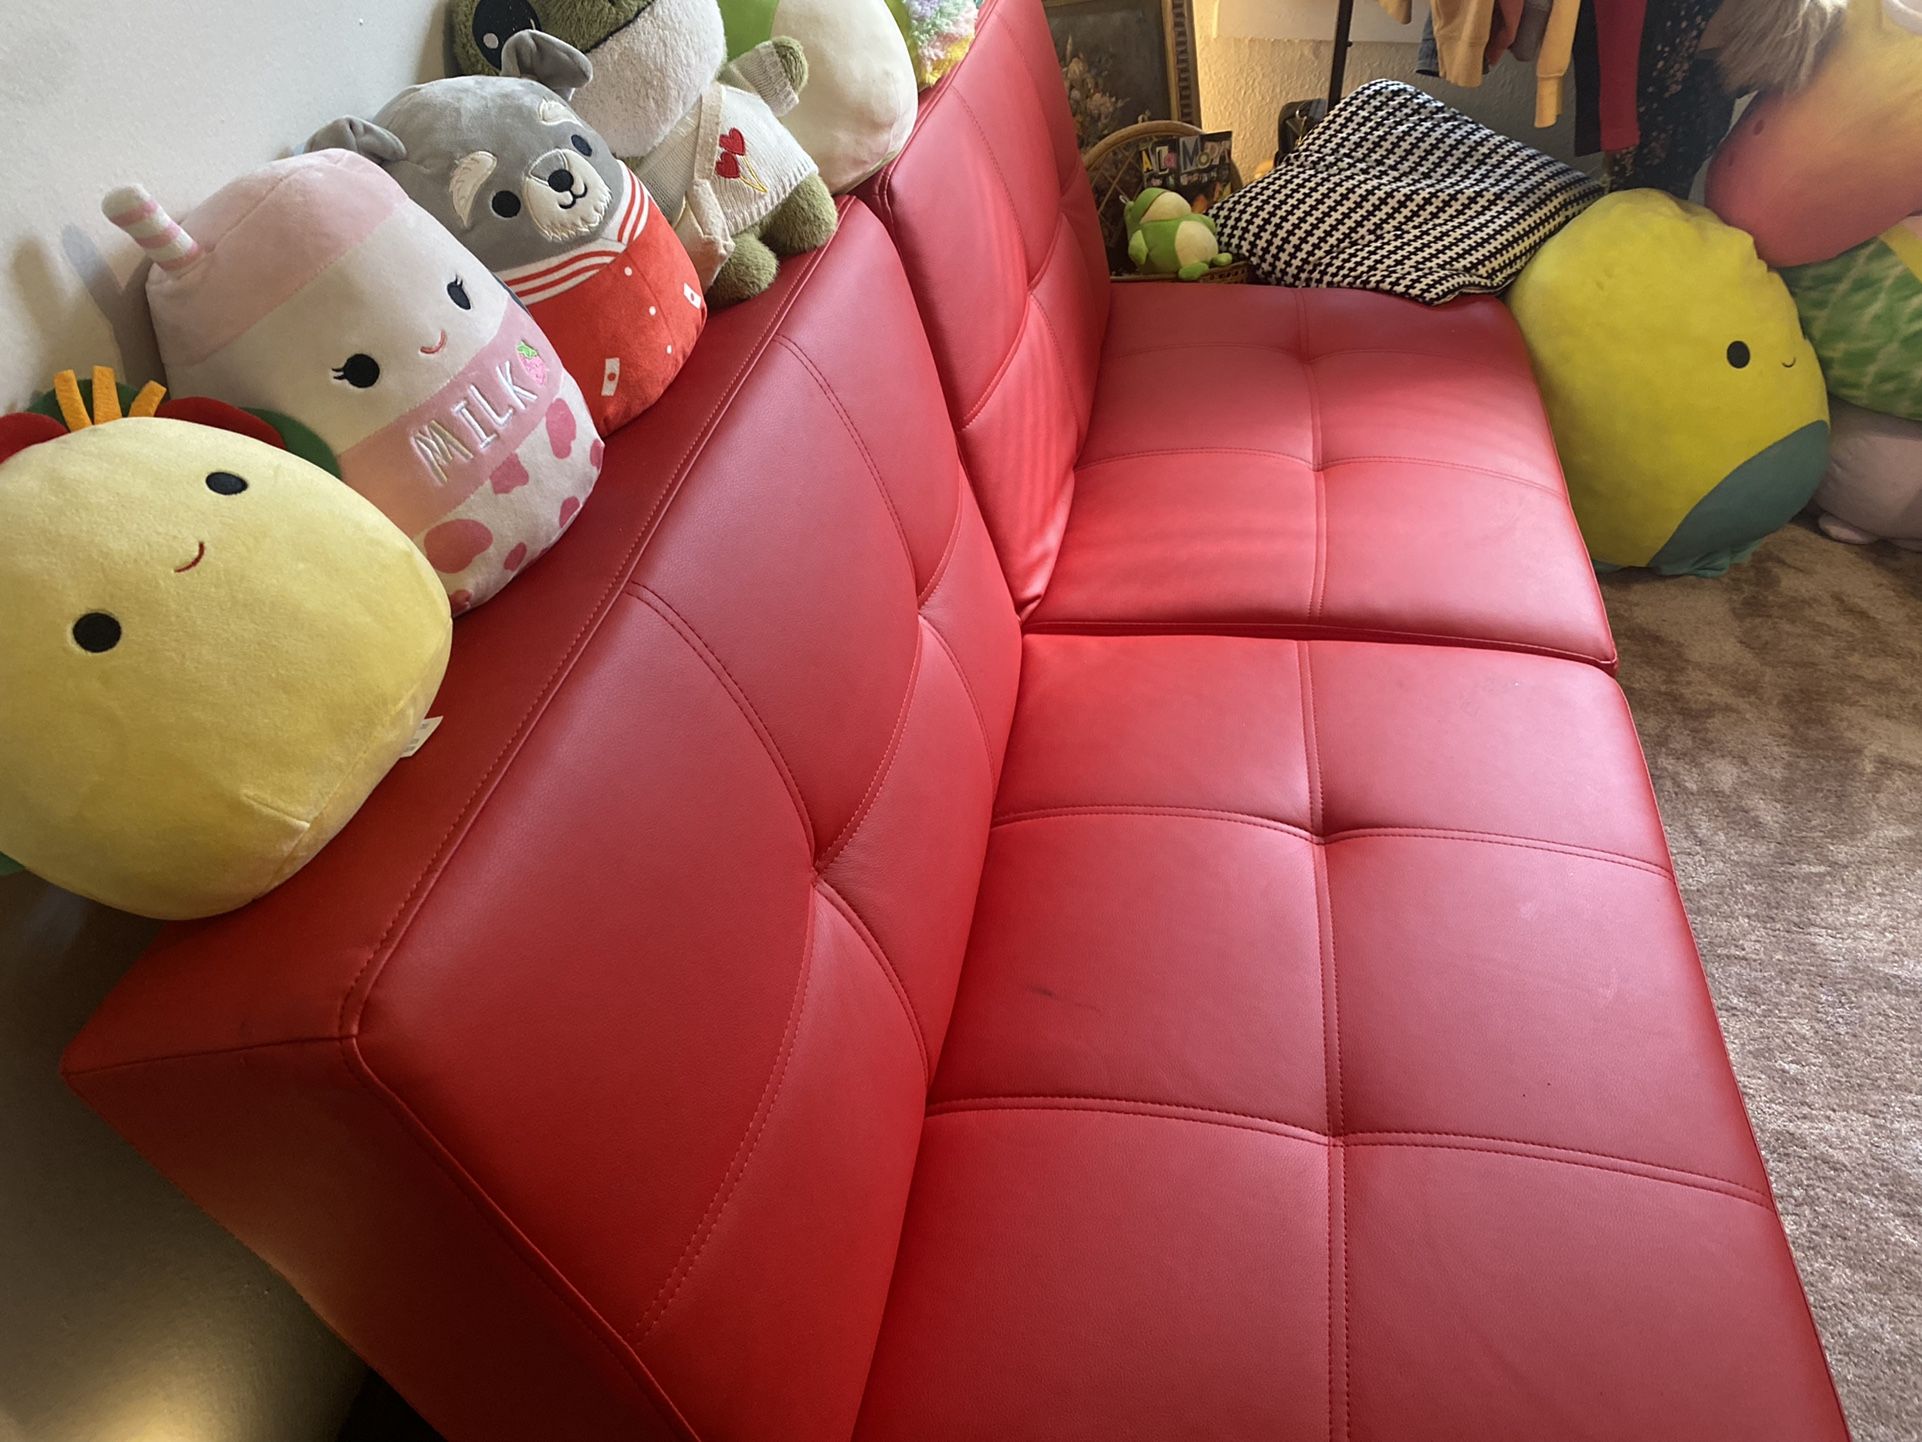 Bright Red Artificial Leather Futon